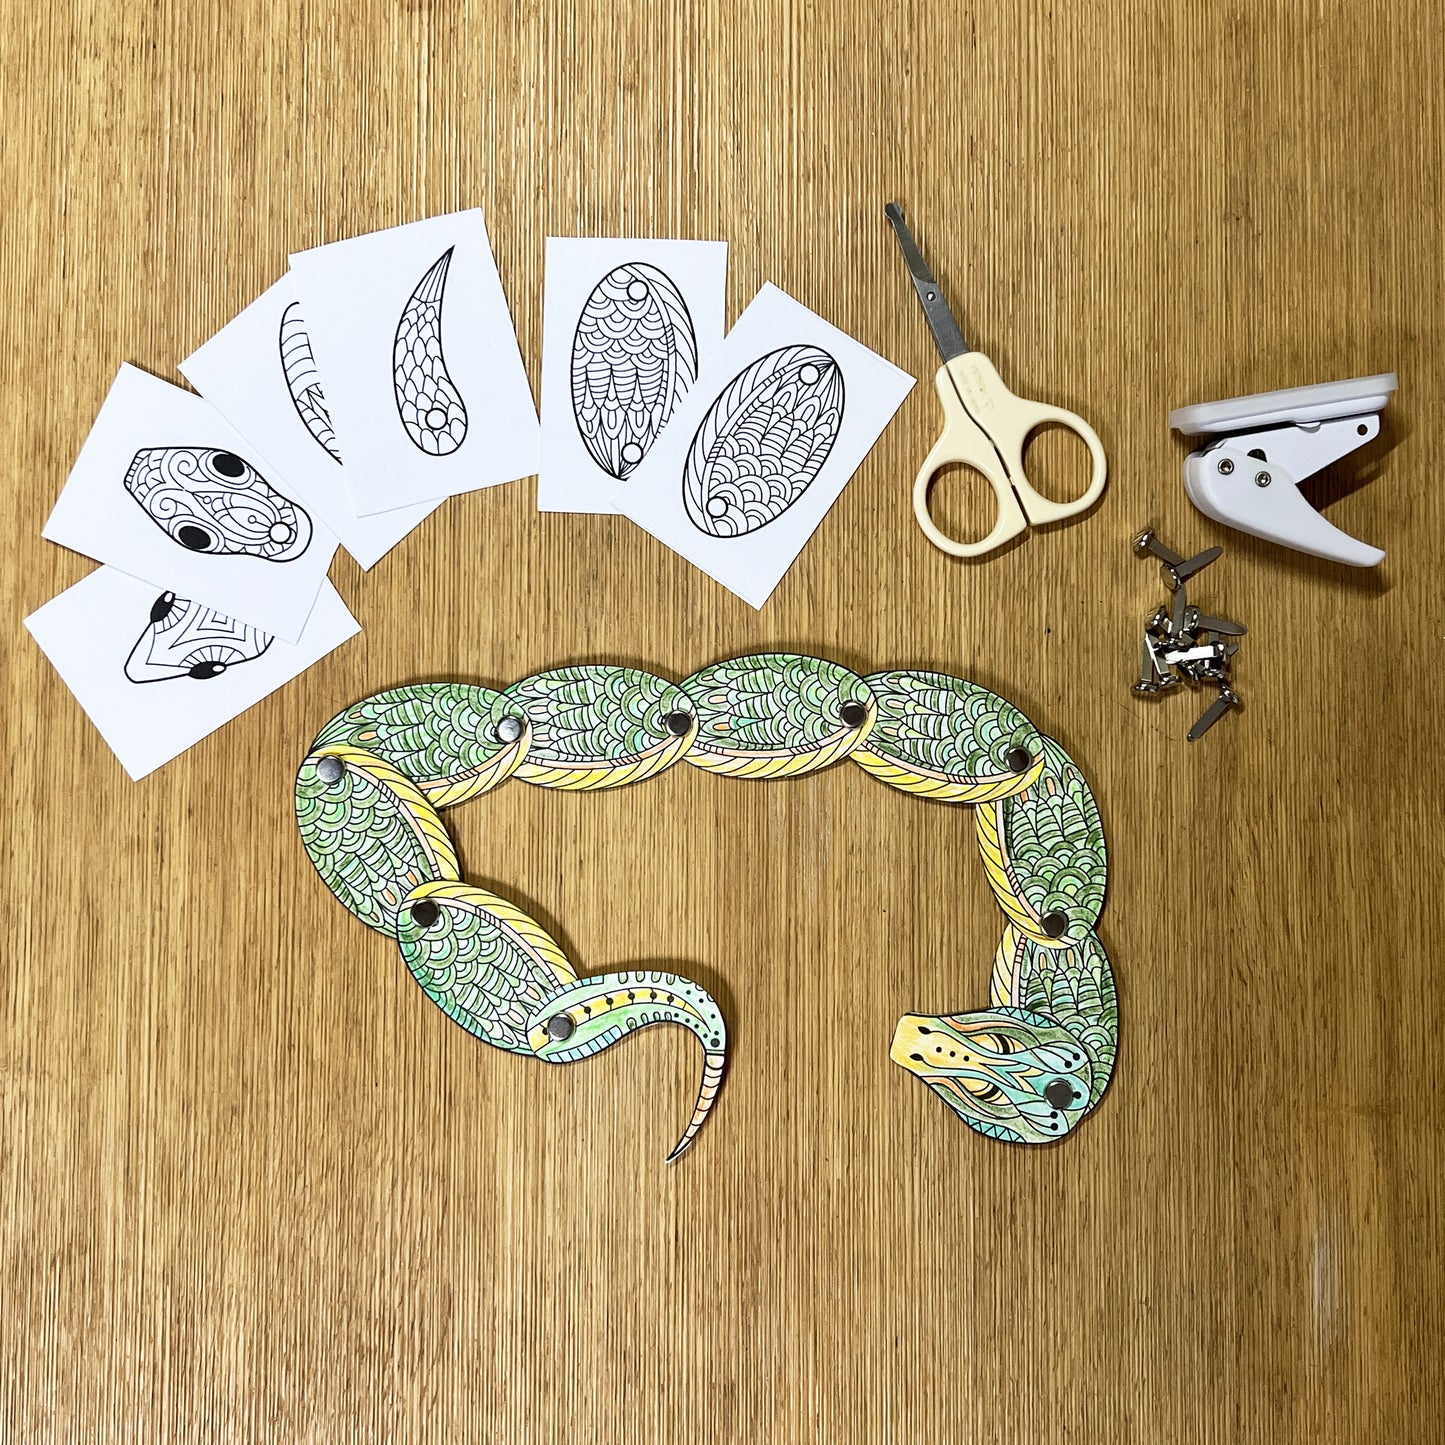 Cut & Color Split Pin Snake for Scissors and coloring Skills.